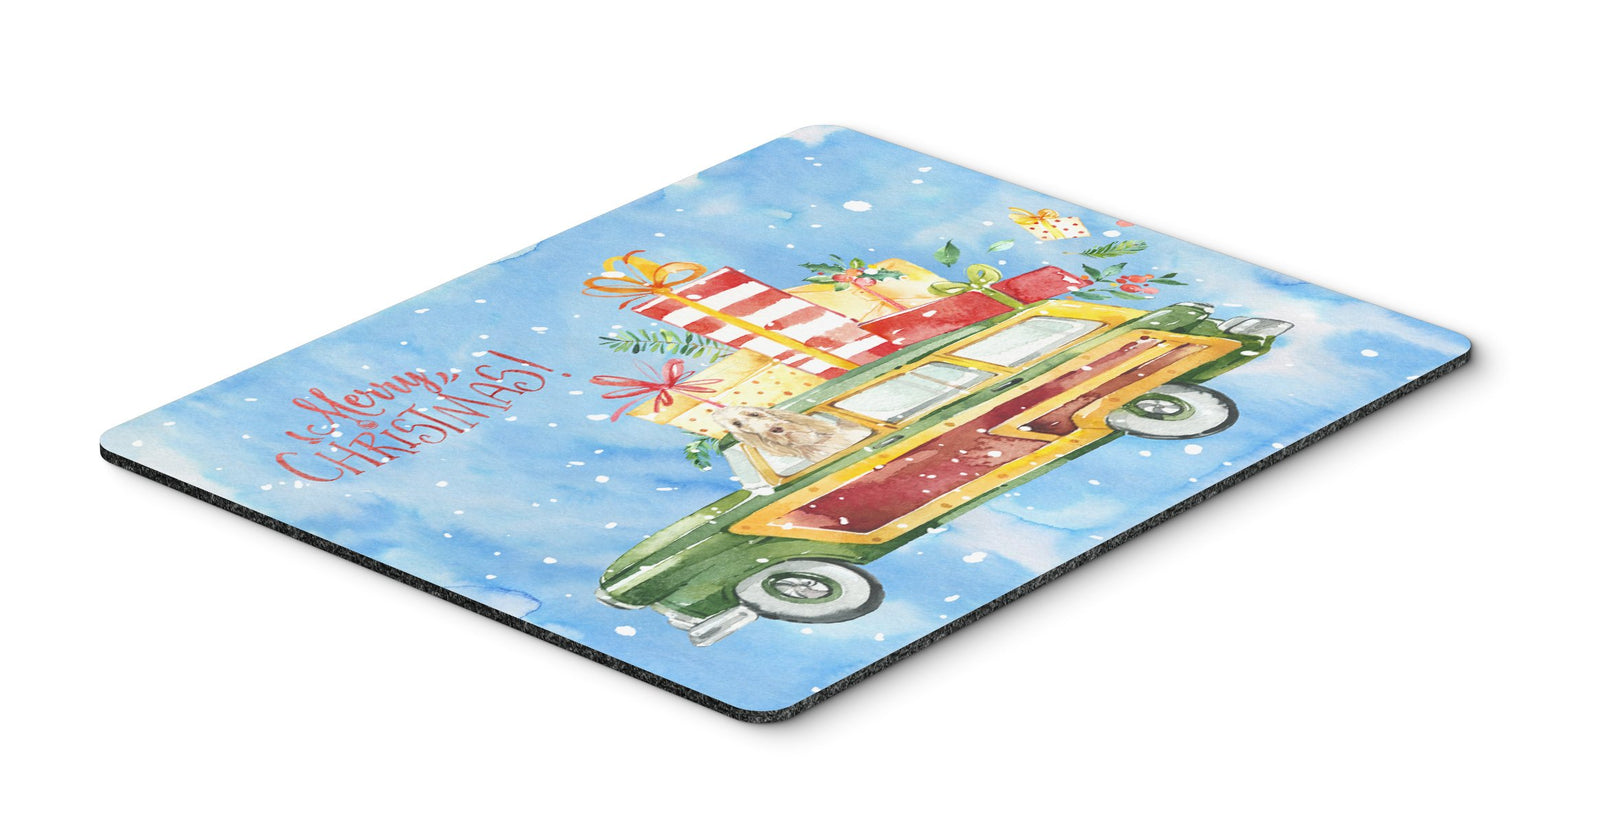 Merry Christmas Spinone Italiano Mouse Pad, Hot Pad or Trivet CK2425MP by Caroline's Treasures